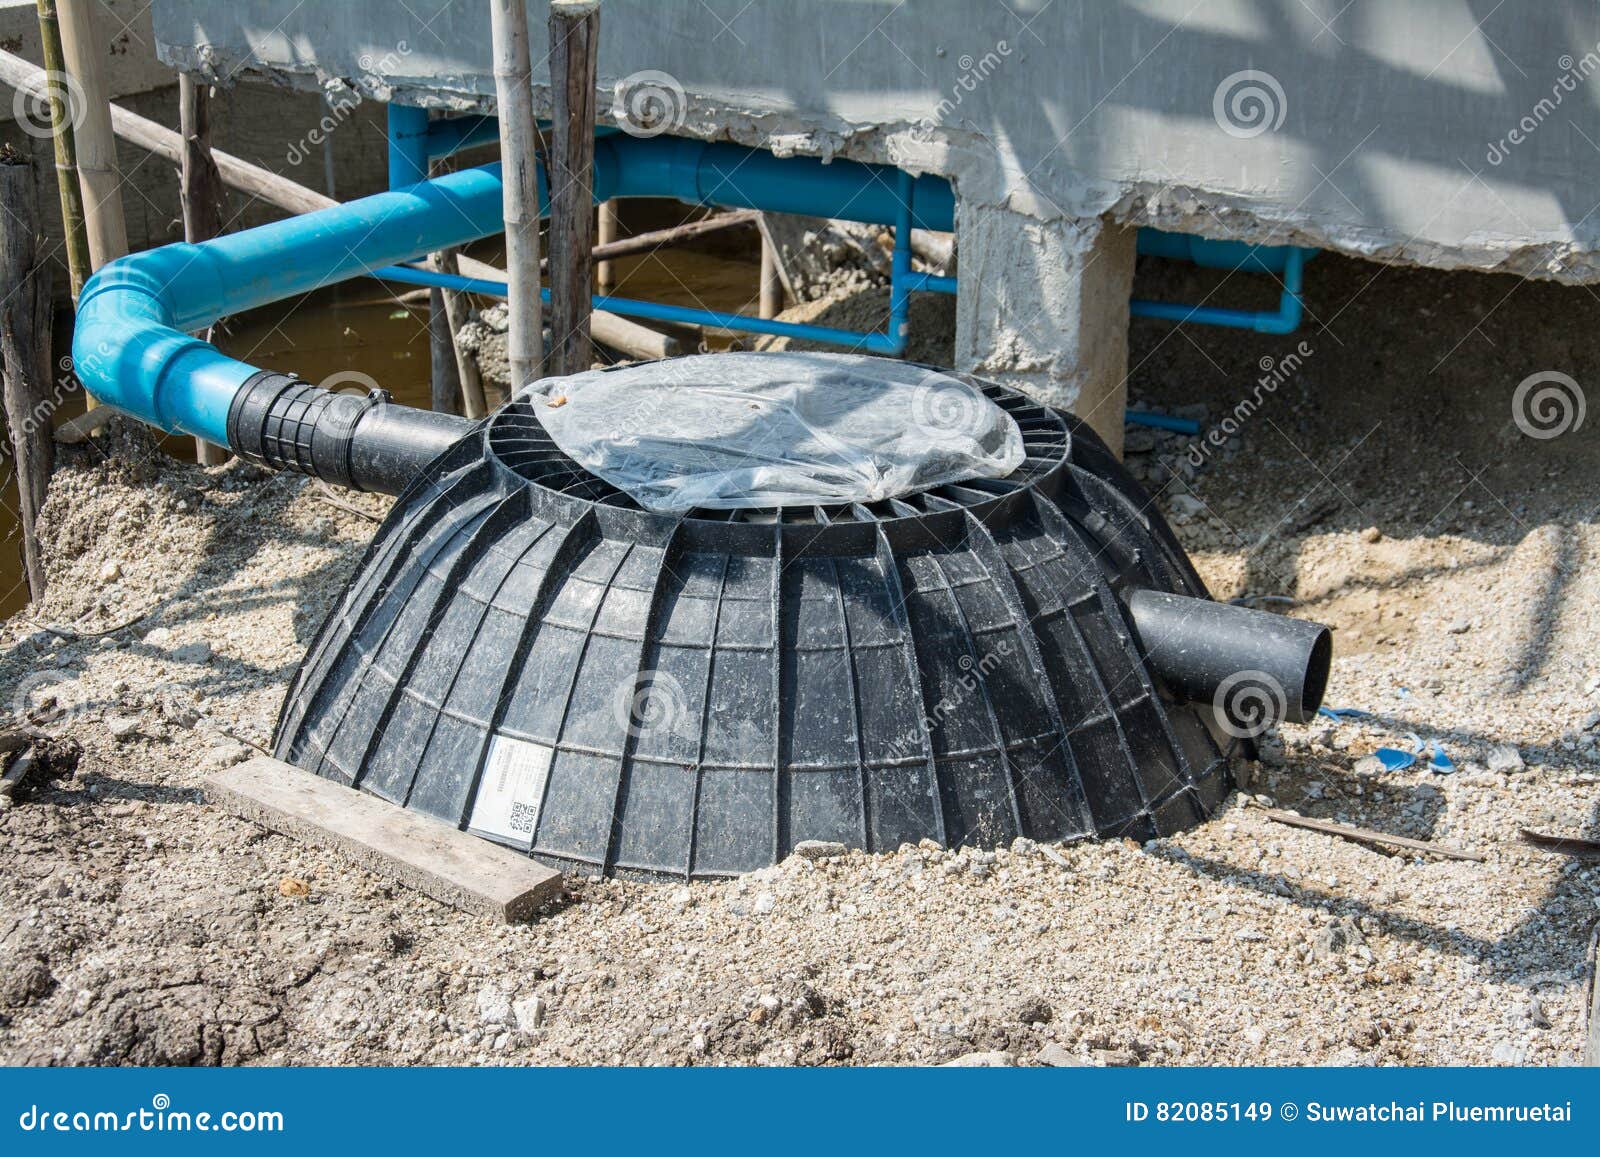 waste treatment tank or septic tank installation in construction site